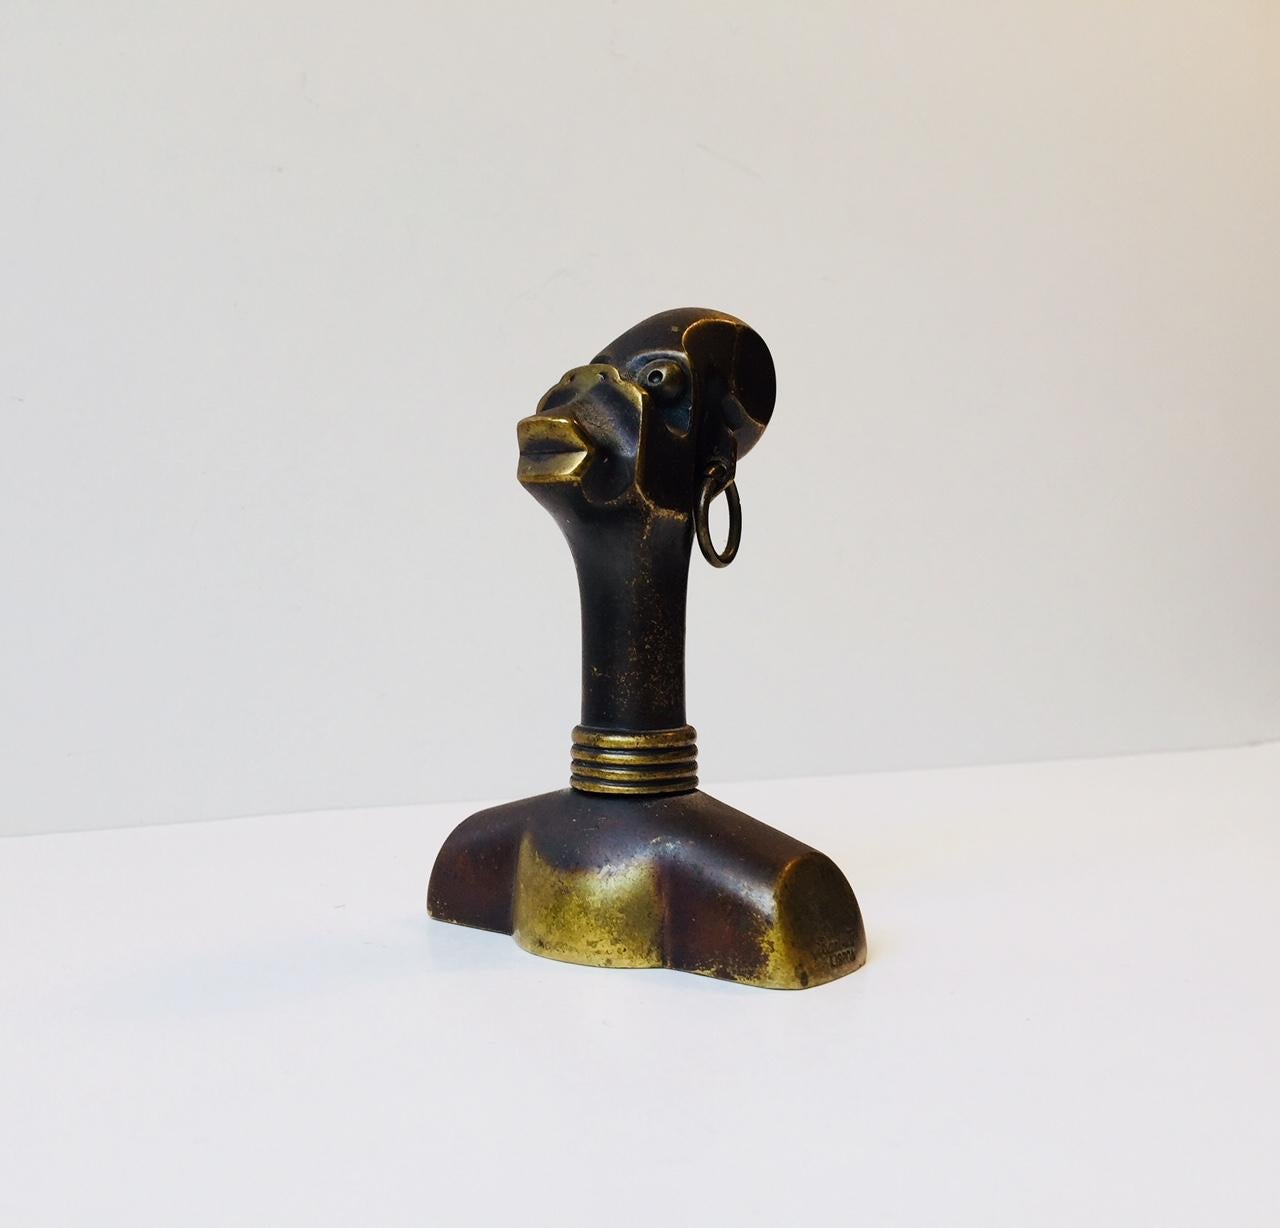 Rare decorative novelty Bar item. Its made of forced patinated bronze and features a concealed bottle opener and corkscrew. It is imprinted Barberto, Lisboa and was manufactured during the 1970s in Portugal. The style of this piece is very